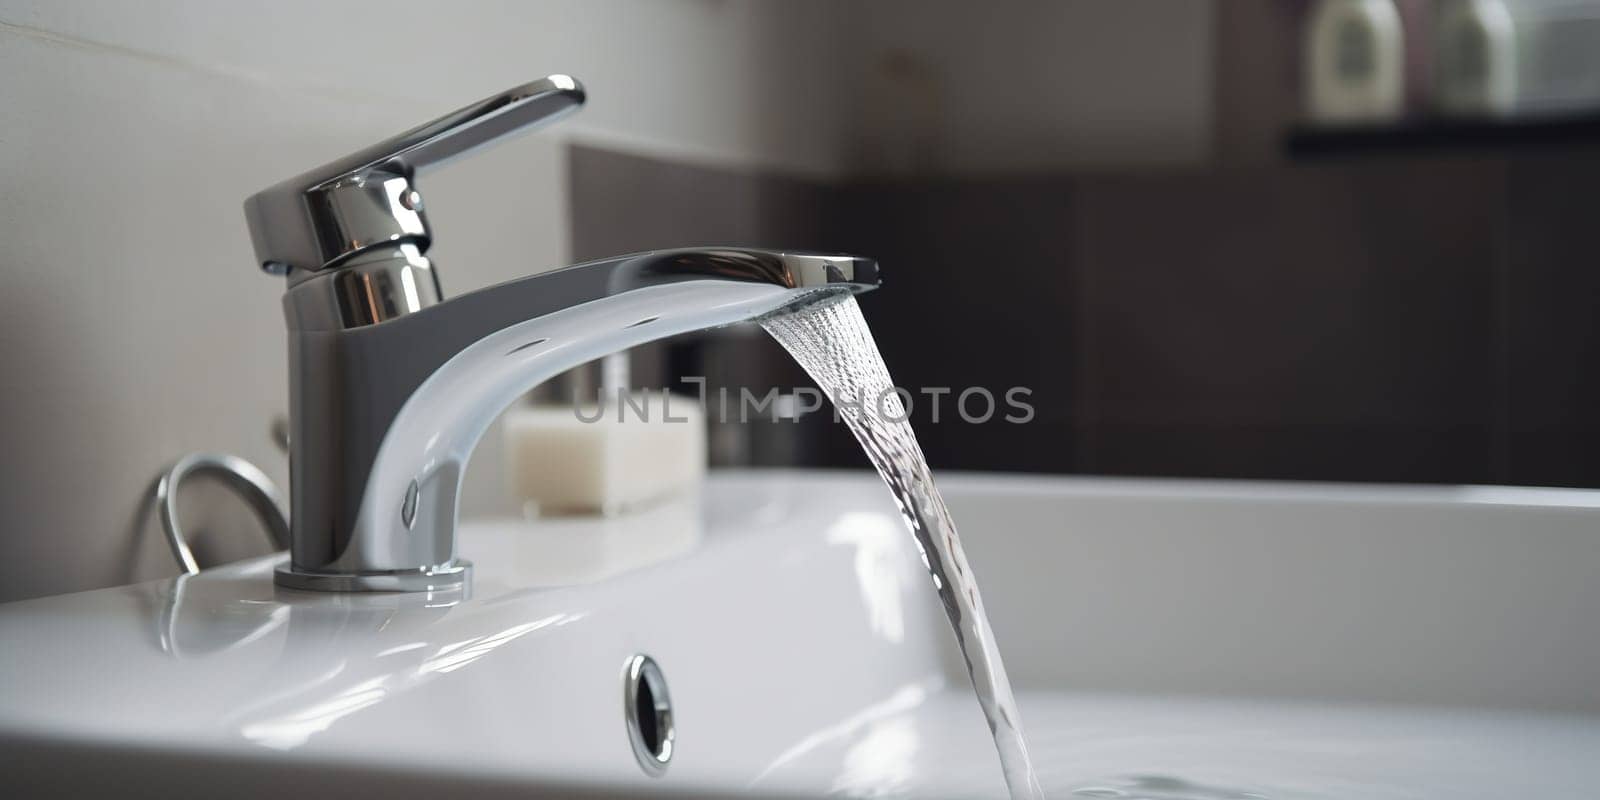 Water pours into sink from mixer in bathroom closeup. by tan4ikk1